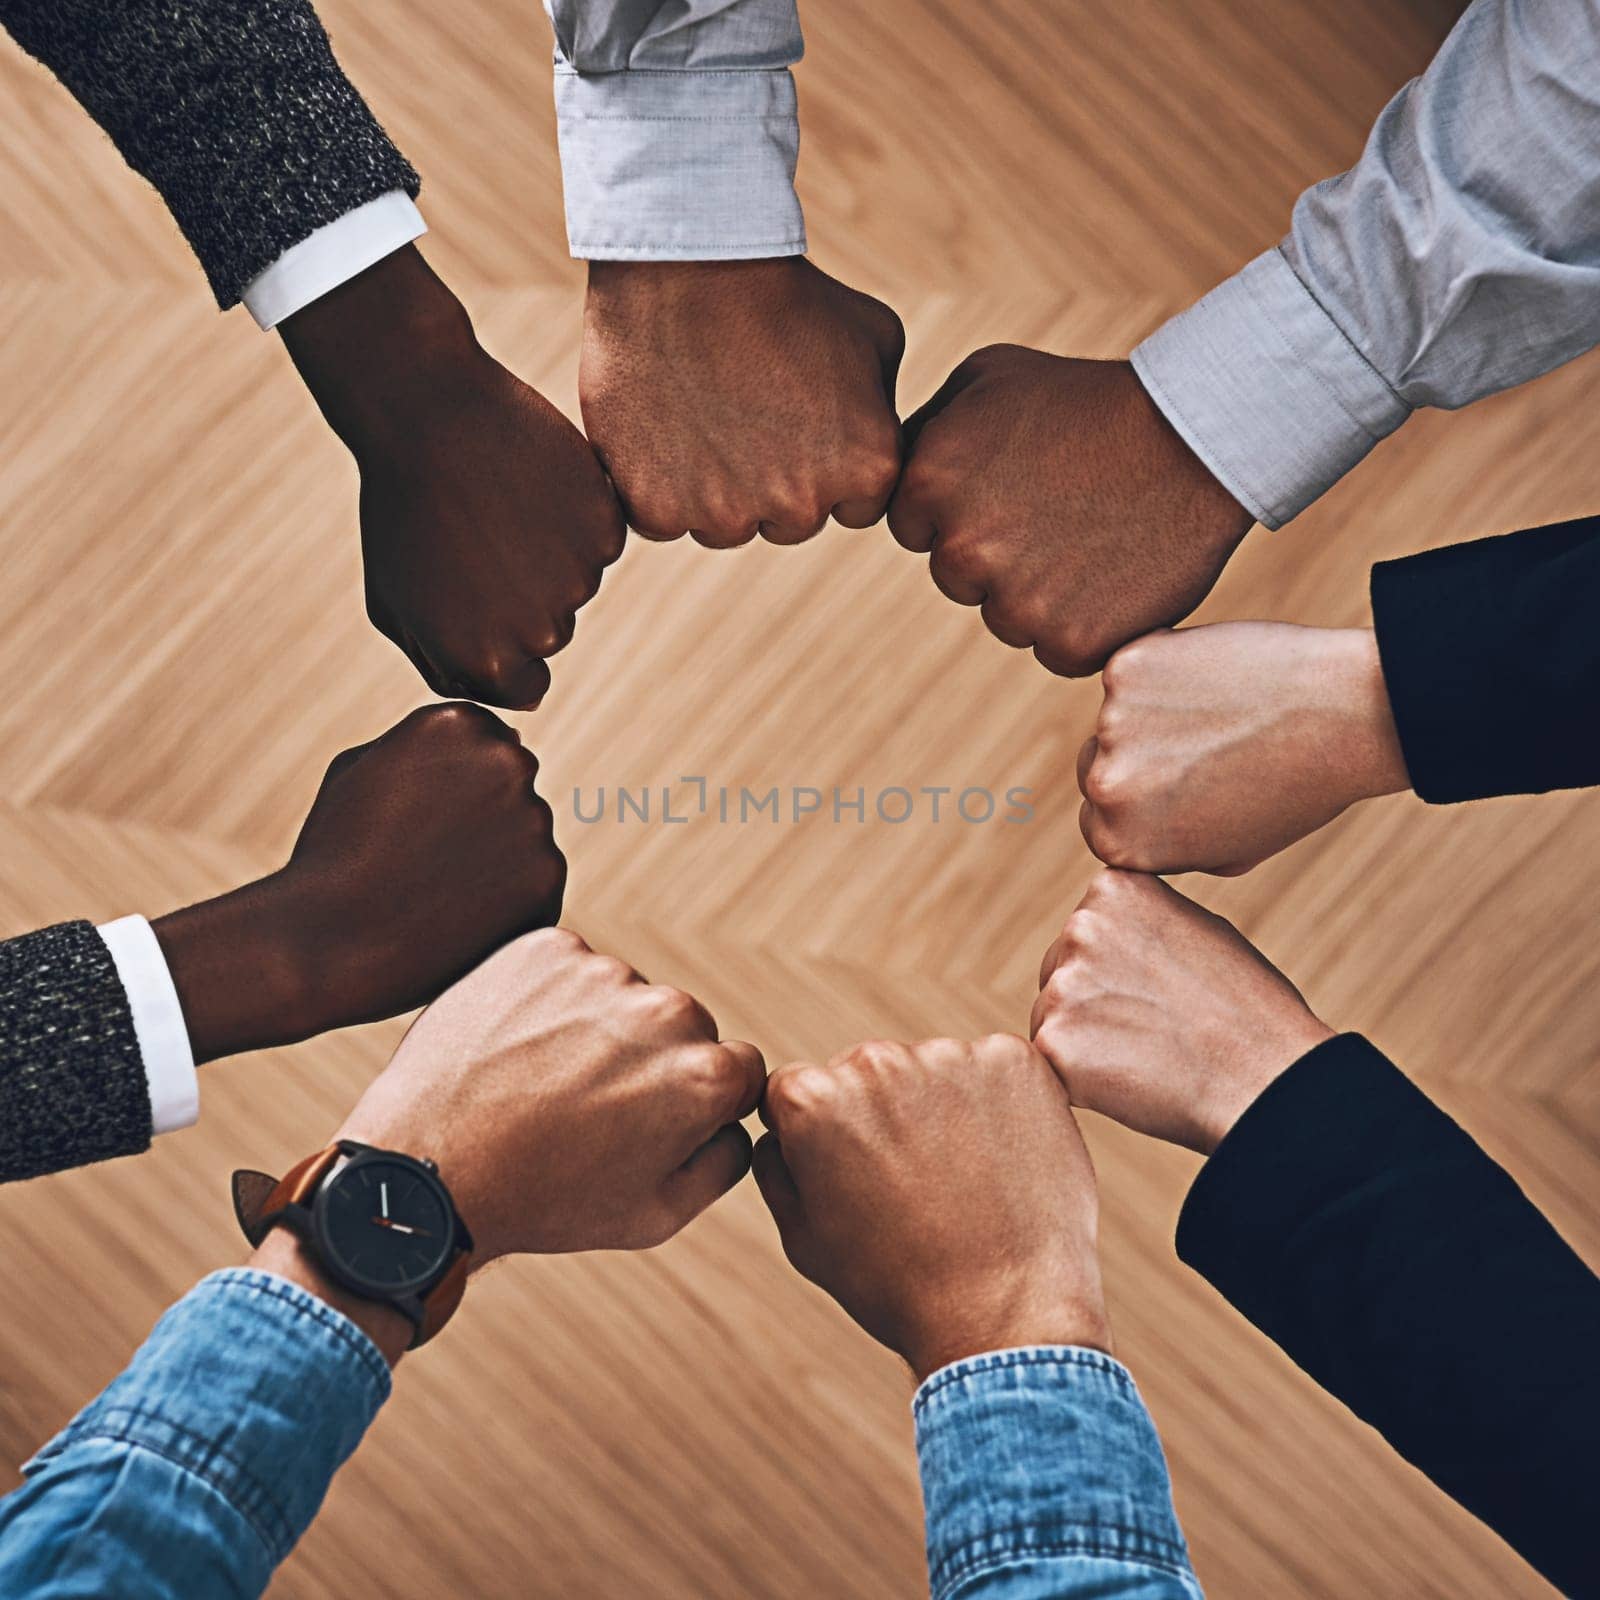 Team building, fist bump or hands of business people for motivation, group support or community in office. Teamwork, above or circle of fists for diversity, collaboration or partnership for a mission.